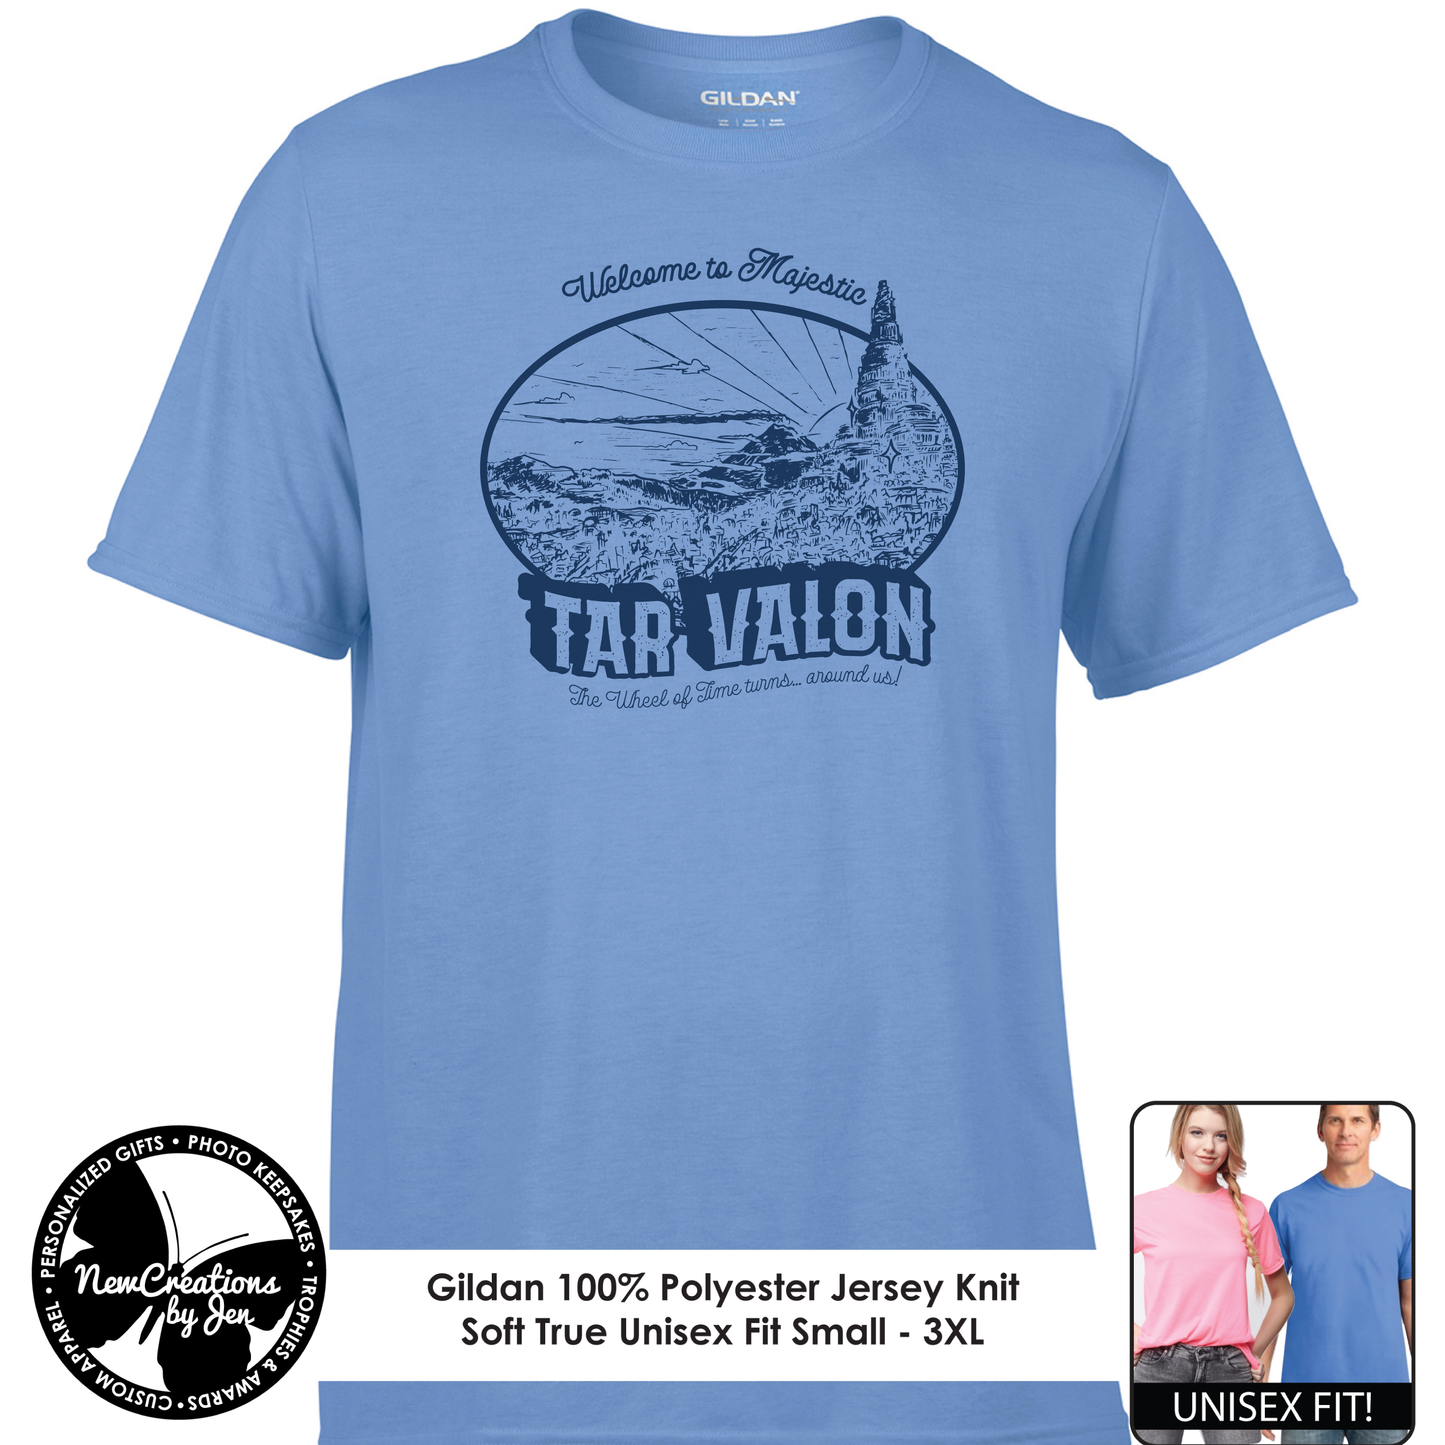 Welcome to Tar Valon - Wheel of Time Inspired  Souvenir Lightweight  Tees